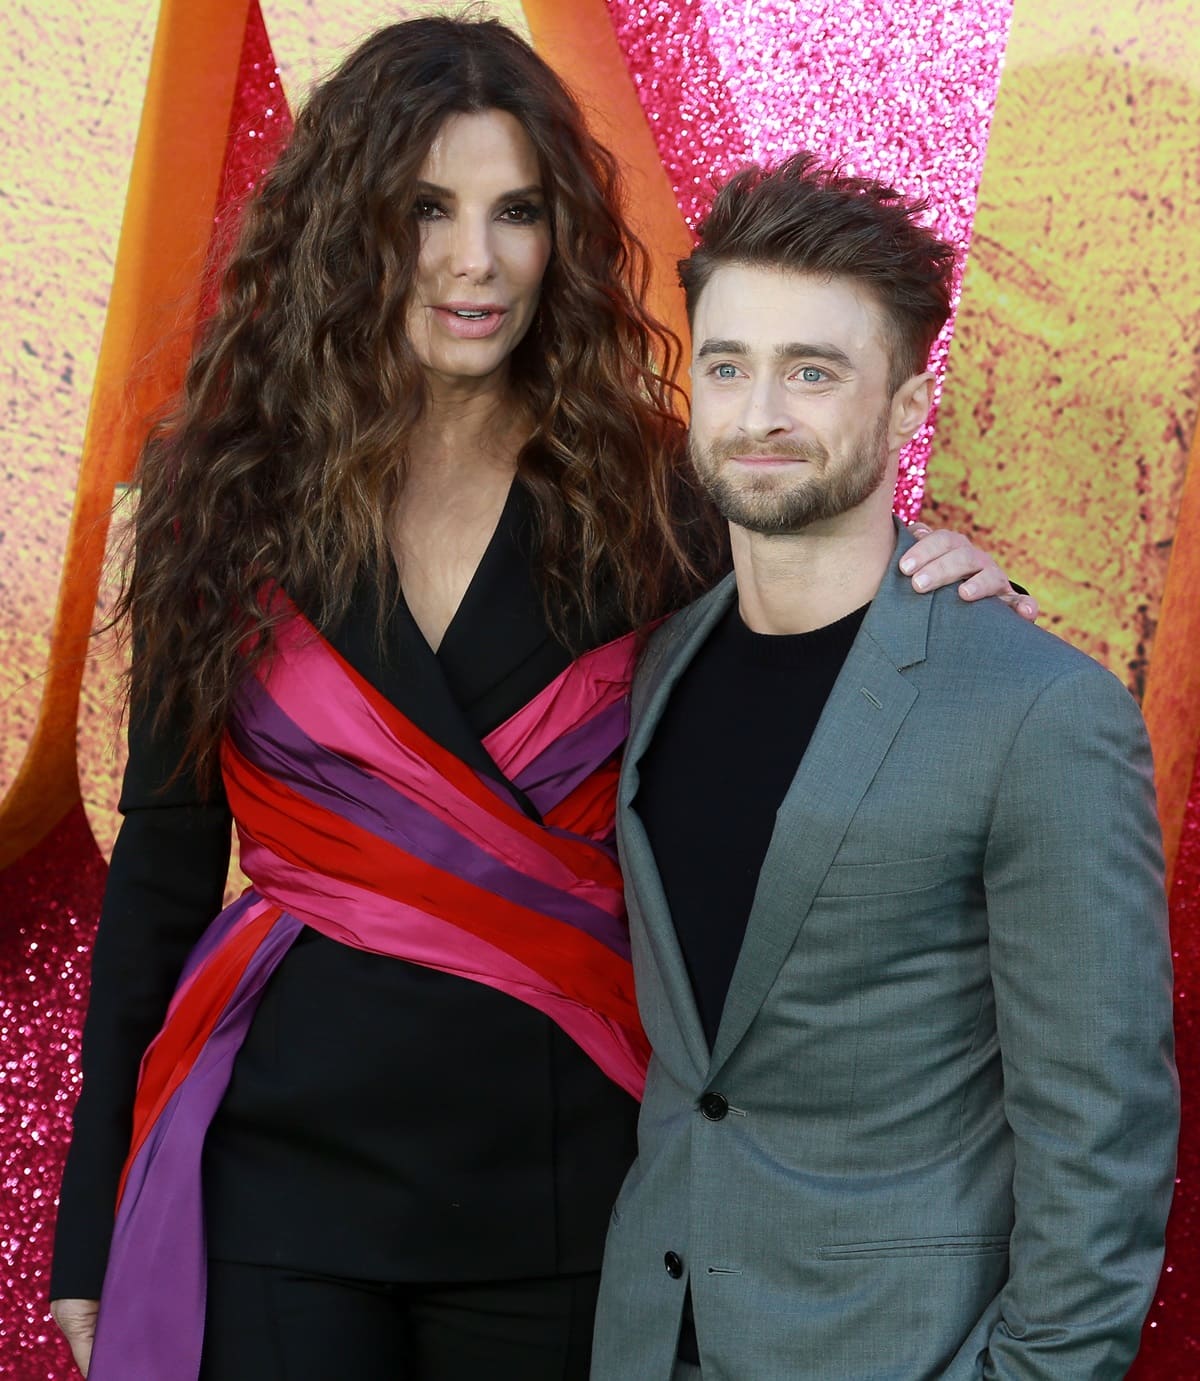 There is a noticeable height difference between Sandra Bullock, who stands at 5ft 7 (170.2 cm), and Daniel Radcliffe, whose height is 5ft 4 ½ (163.8 cm)